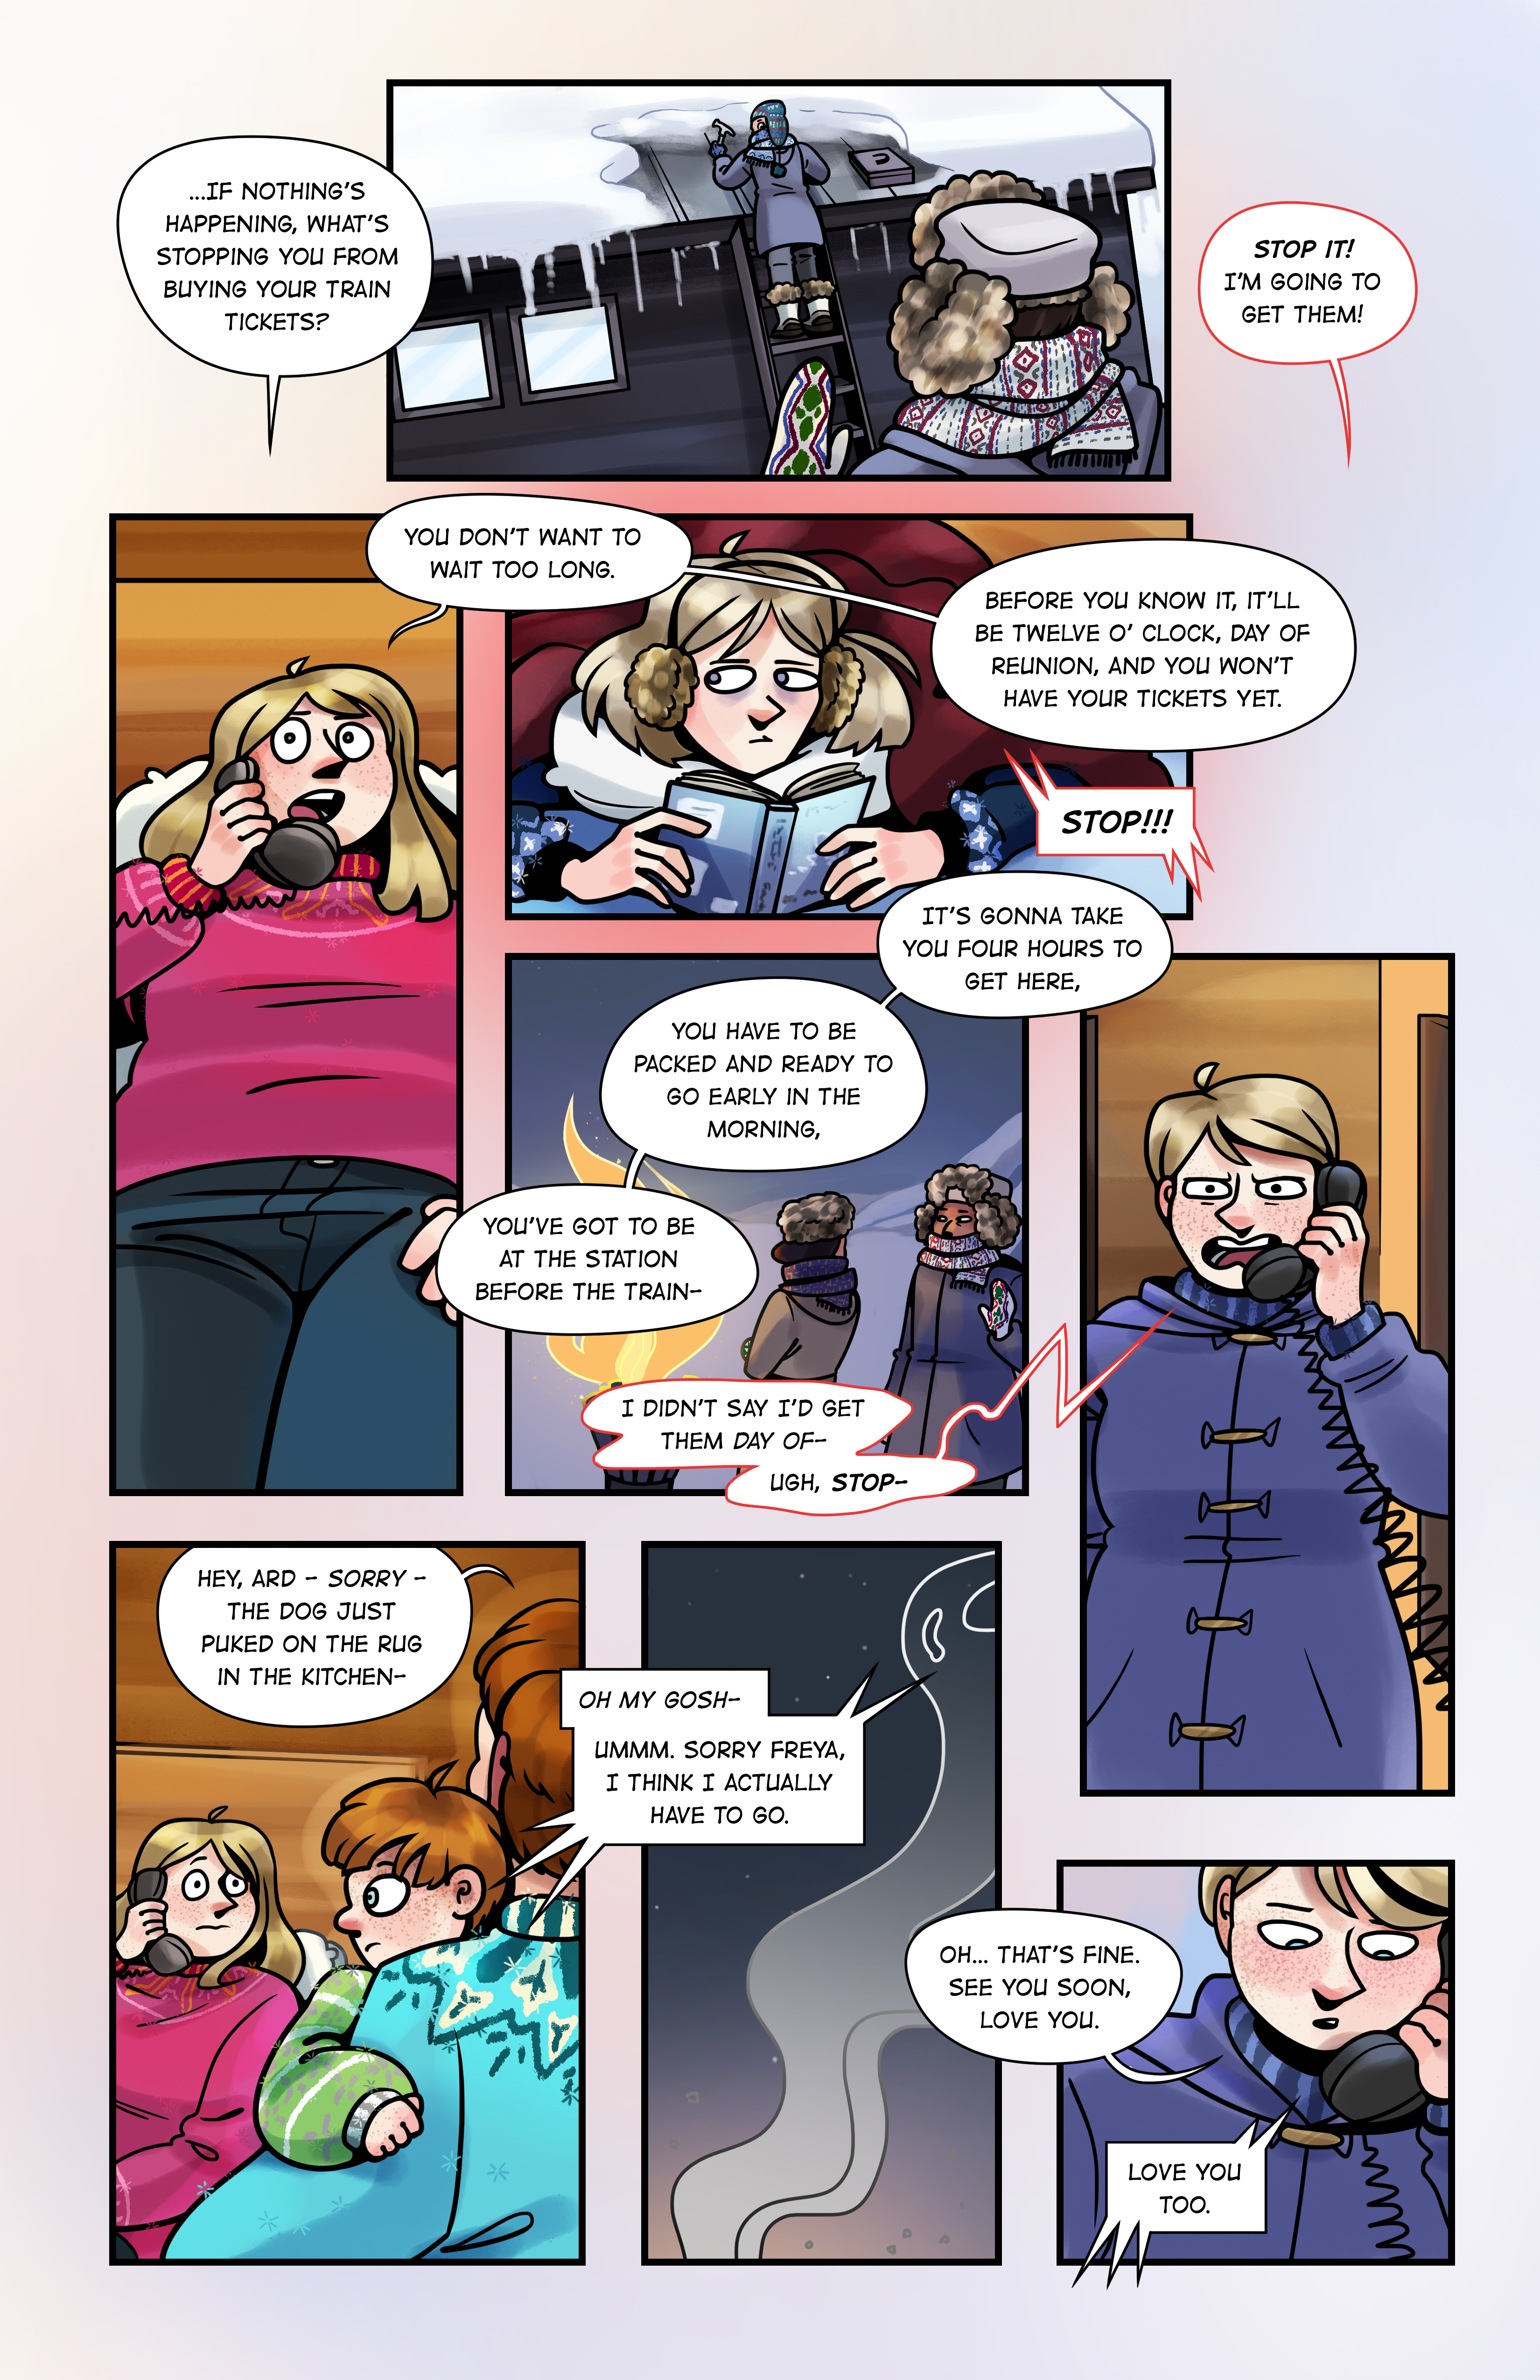 Continuation of Freya's conversation; Arden has to deal with something and ends it. Time passes in Johann's montage. Corin wears earmuffs to drown out anyone who tries to knock on his door.